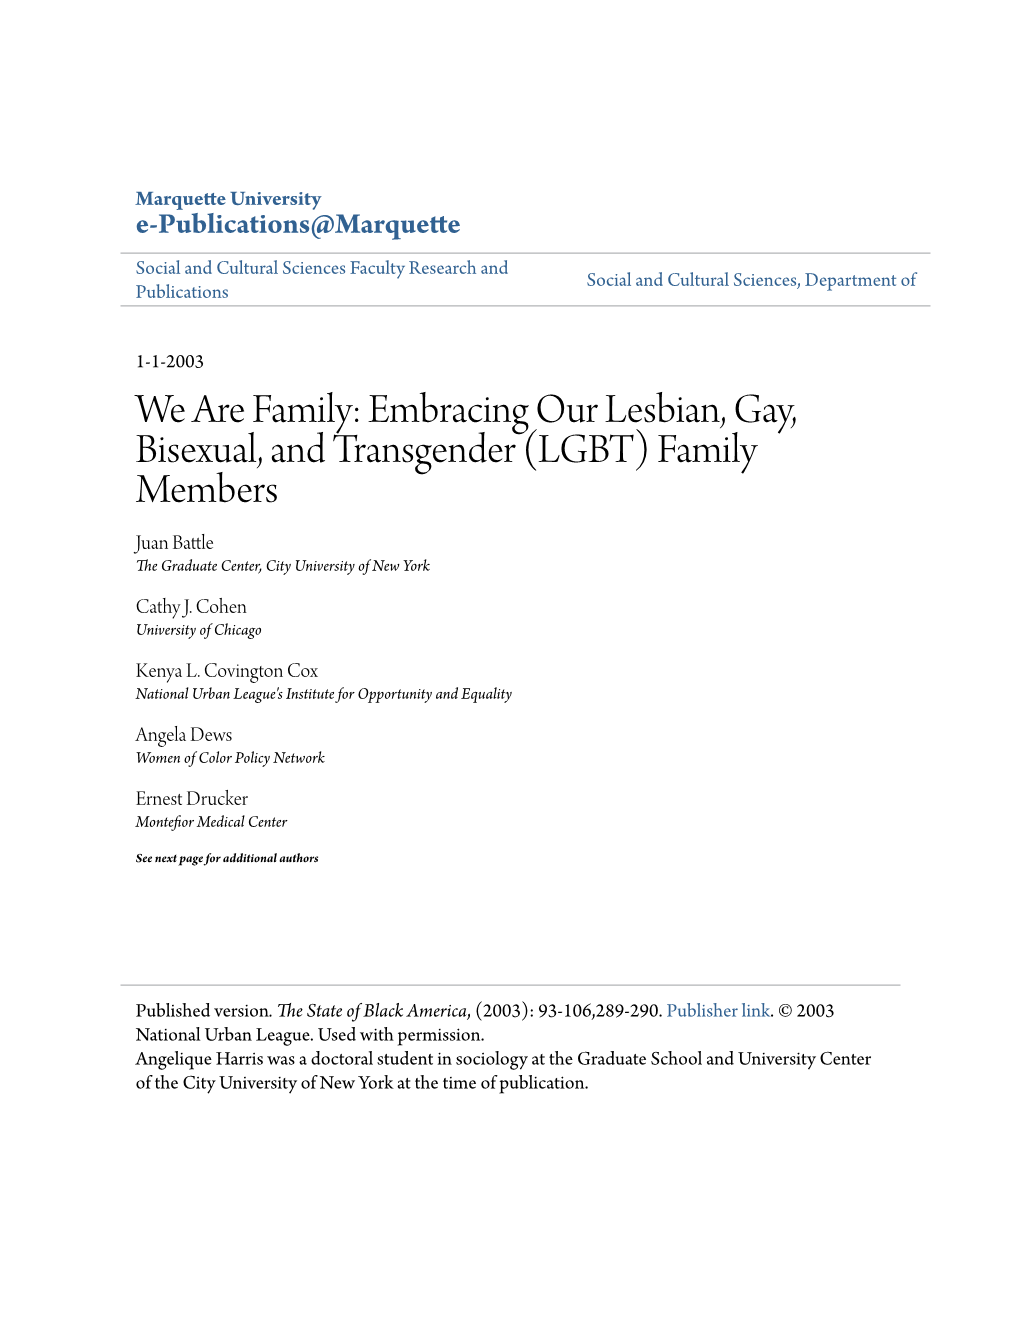 Embracing Our Lesbian, Gay, Bisexual, and Transgender (LGBT) Family Members Juan Battle the Graduate Center, City University of New York